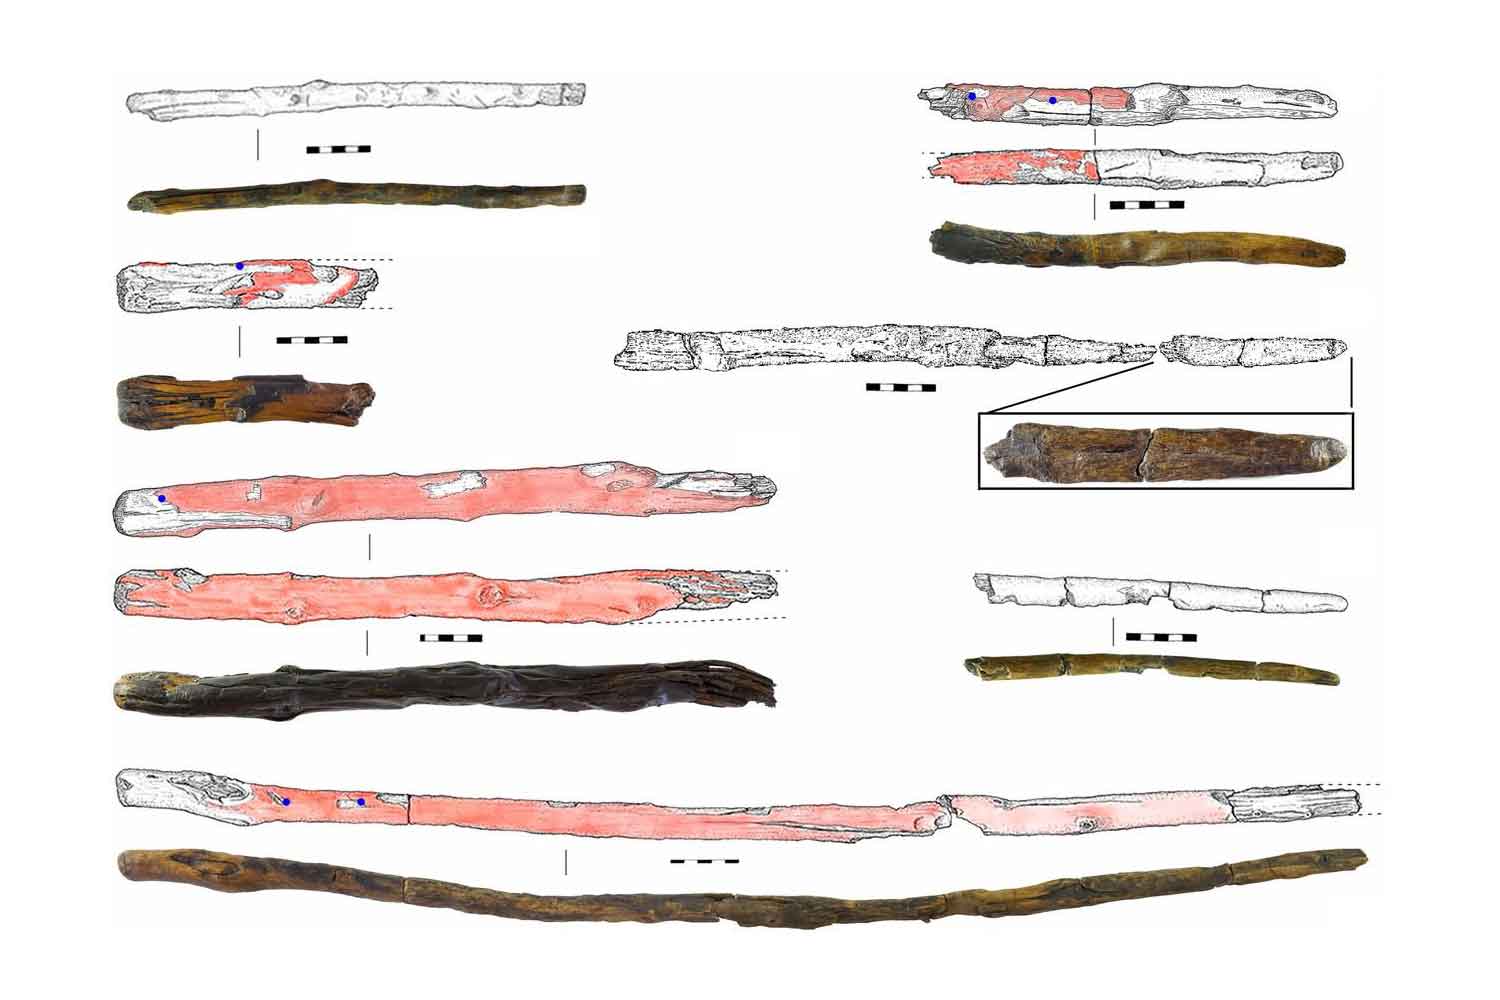 Drawings and photographs of seven wood artifacts. Red areas on the periphery of the artifacts are charred